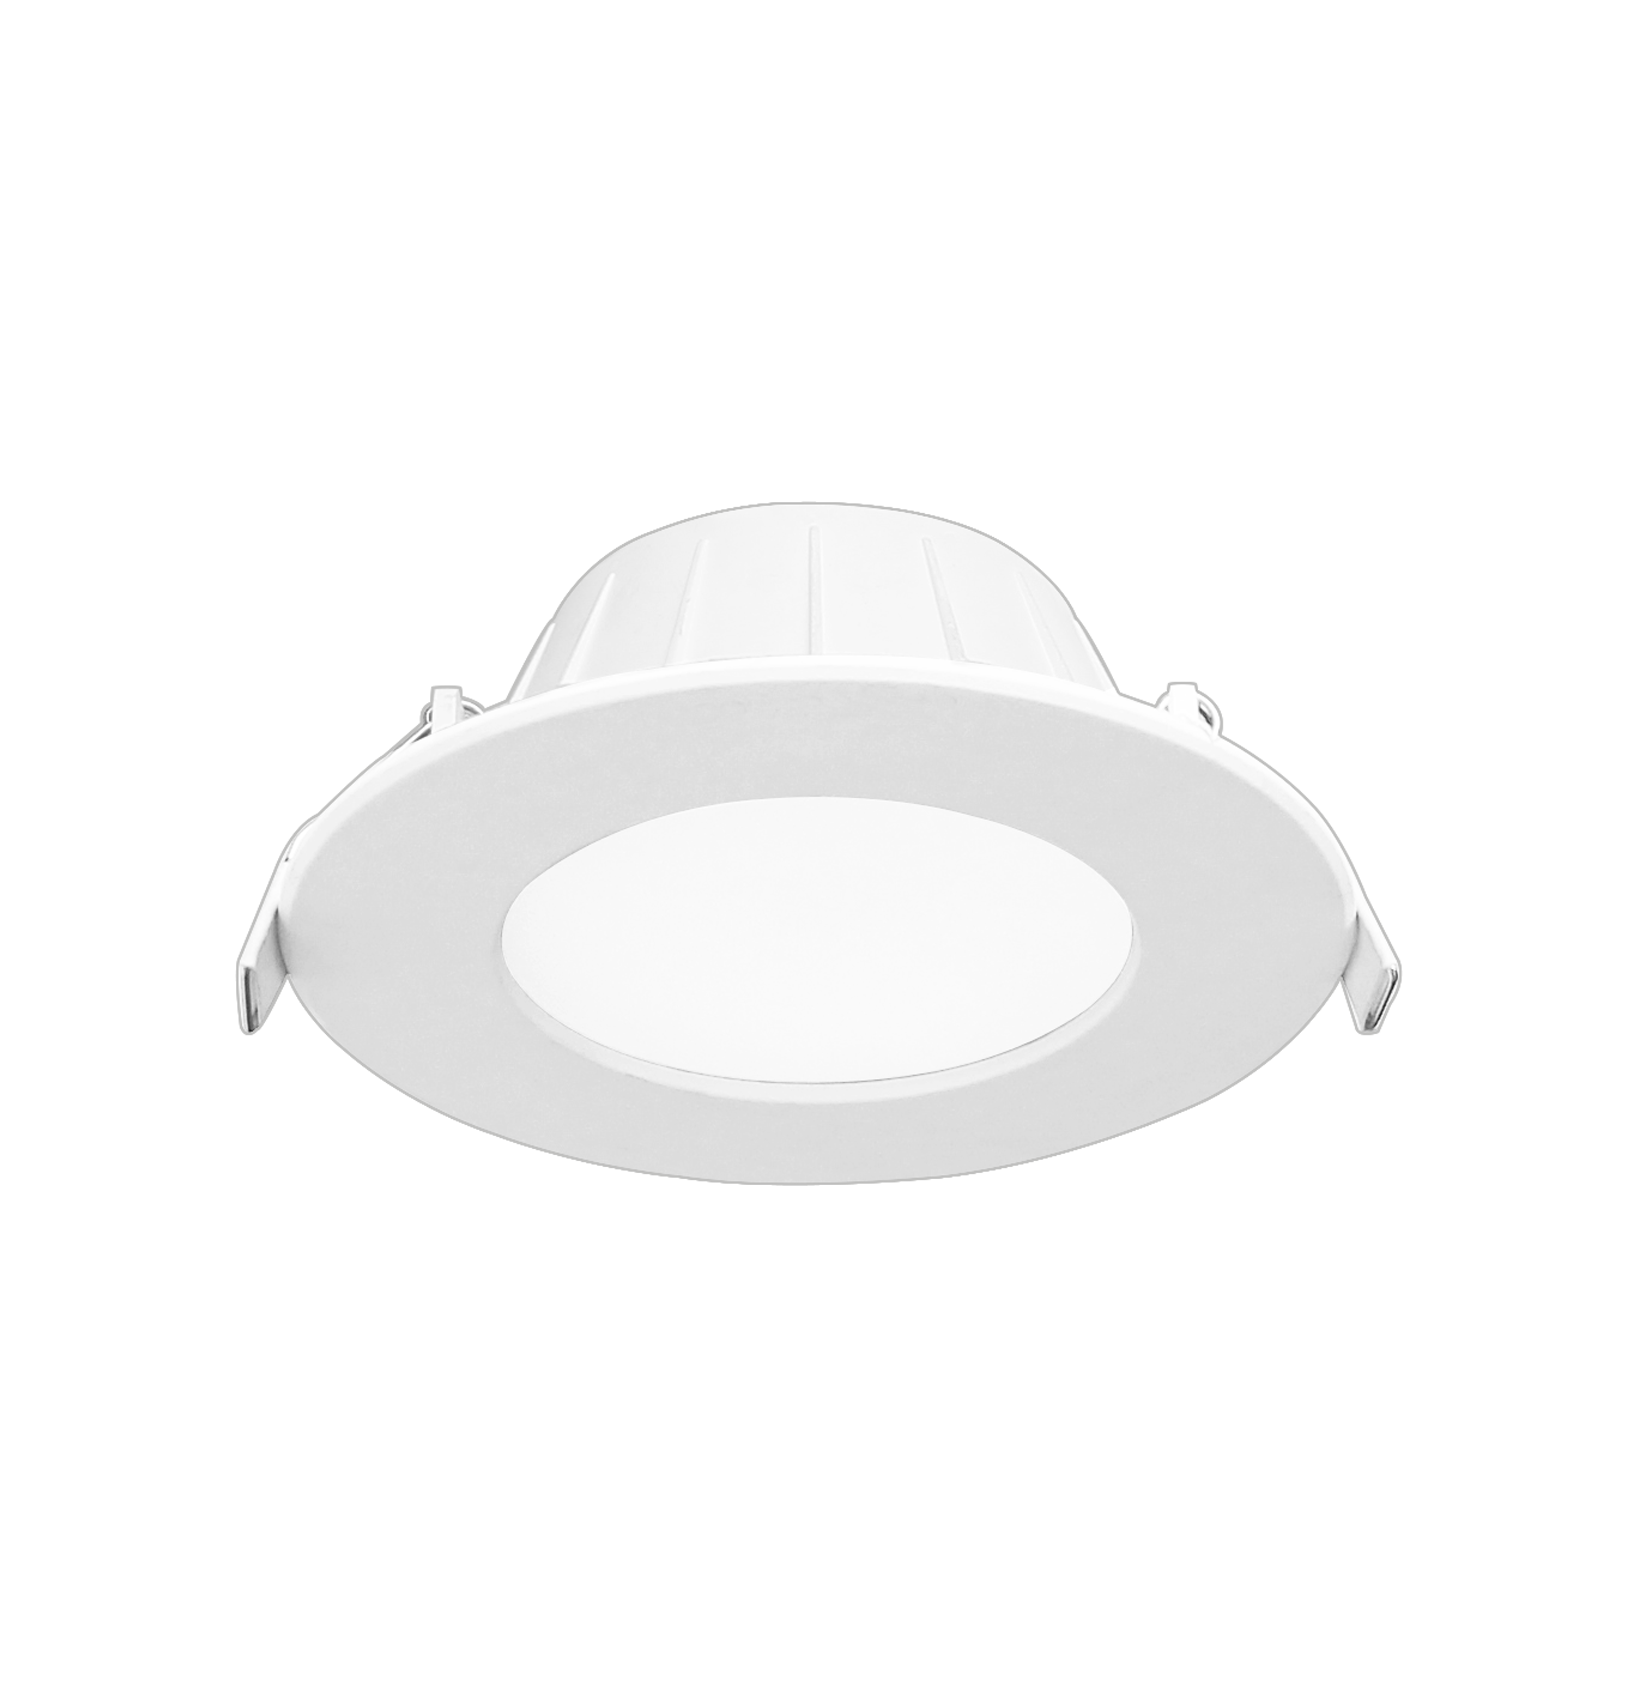 Coste C3 B1a - COMPACT 10W LED HERO DOWNLIGHT - Compact